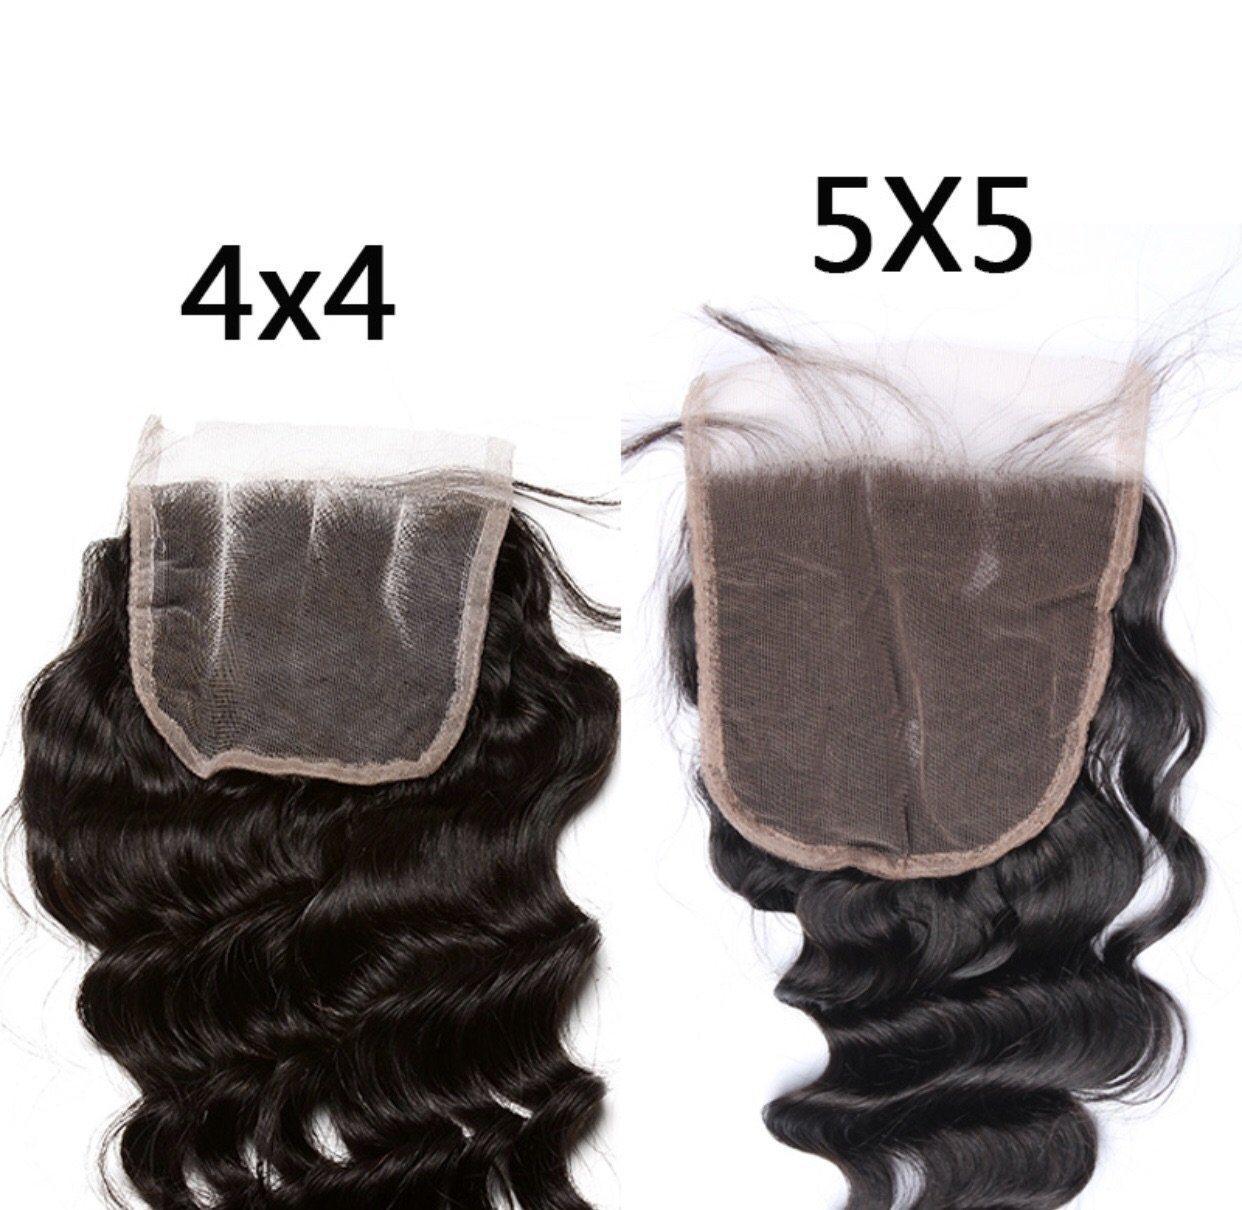 What is a 5x5 Lace Closure and Do I Need One?